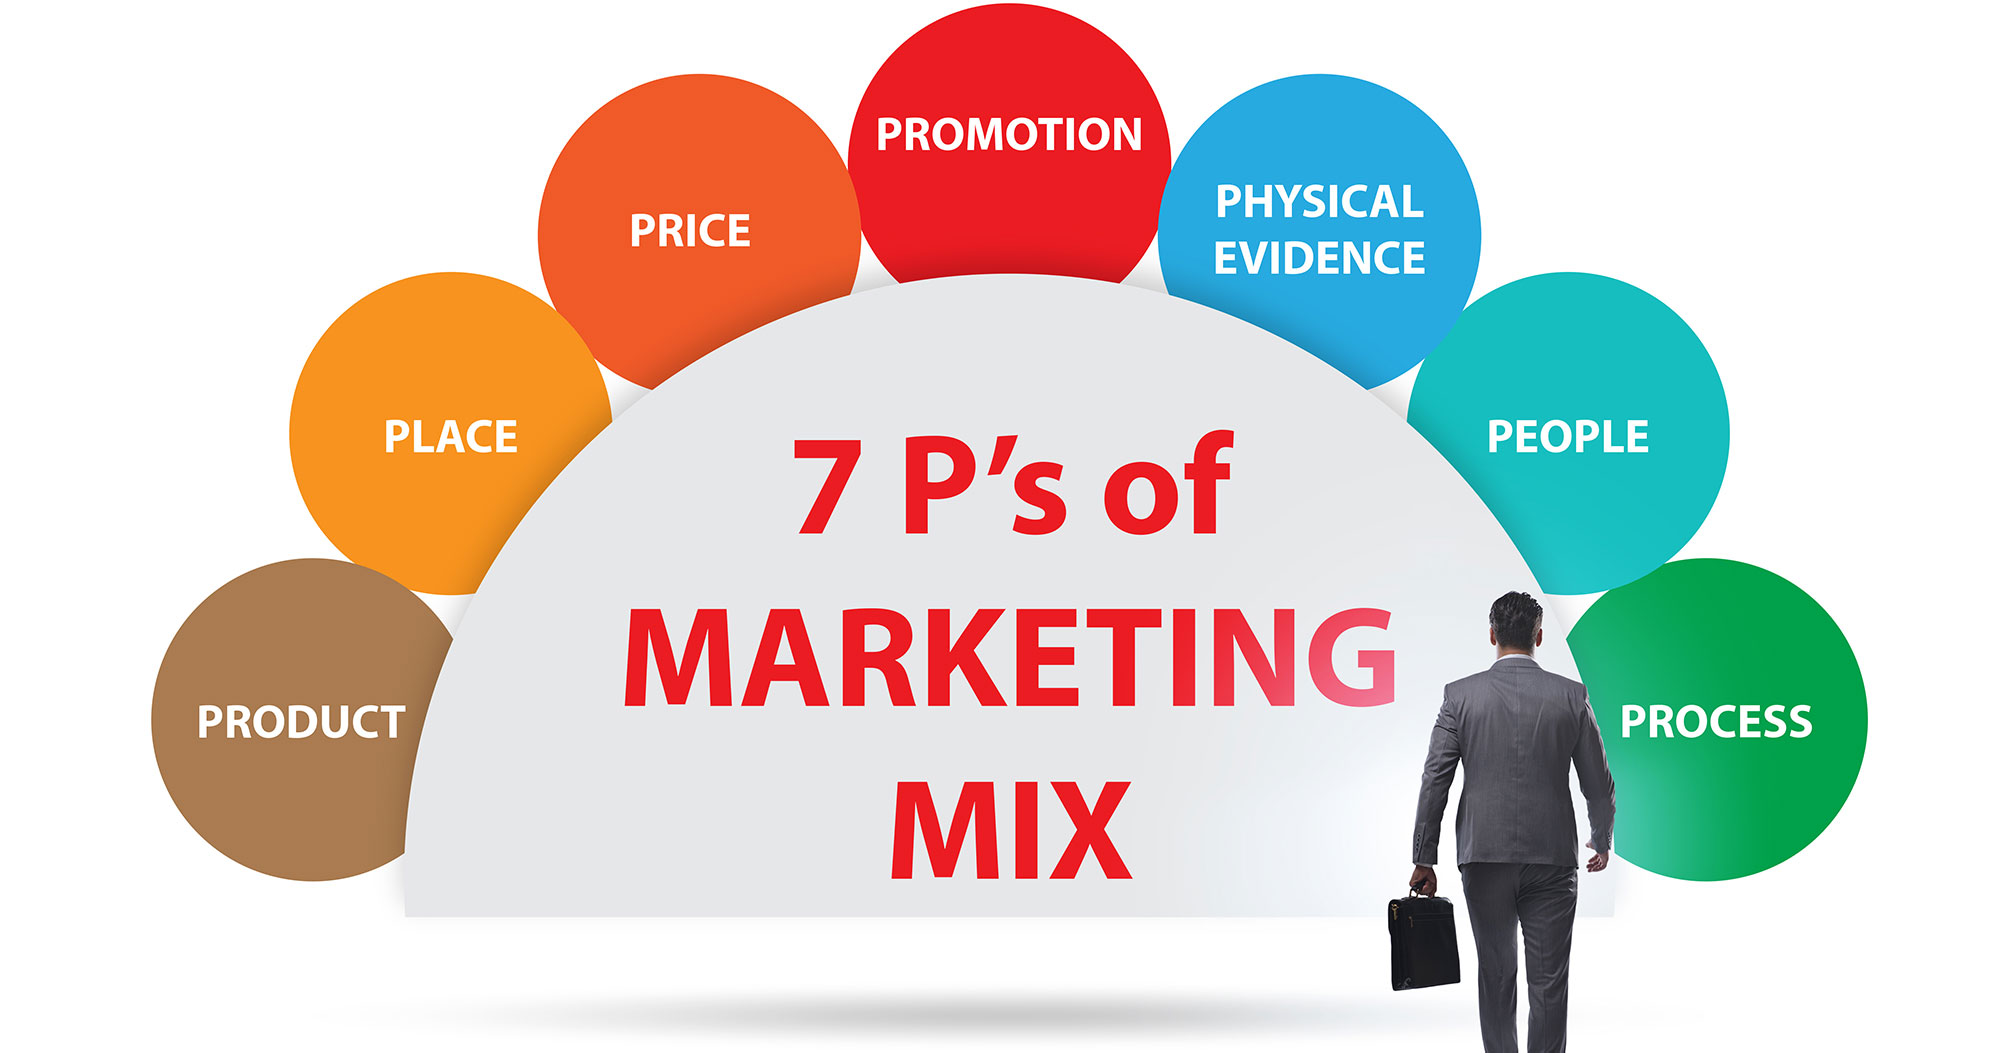 The 7P’s of marketing